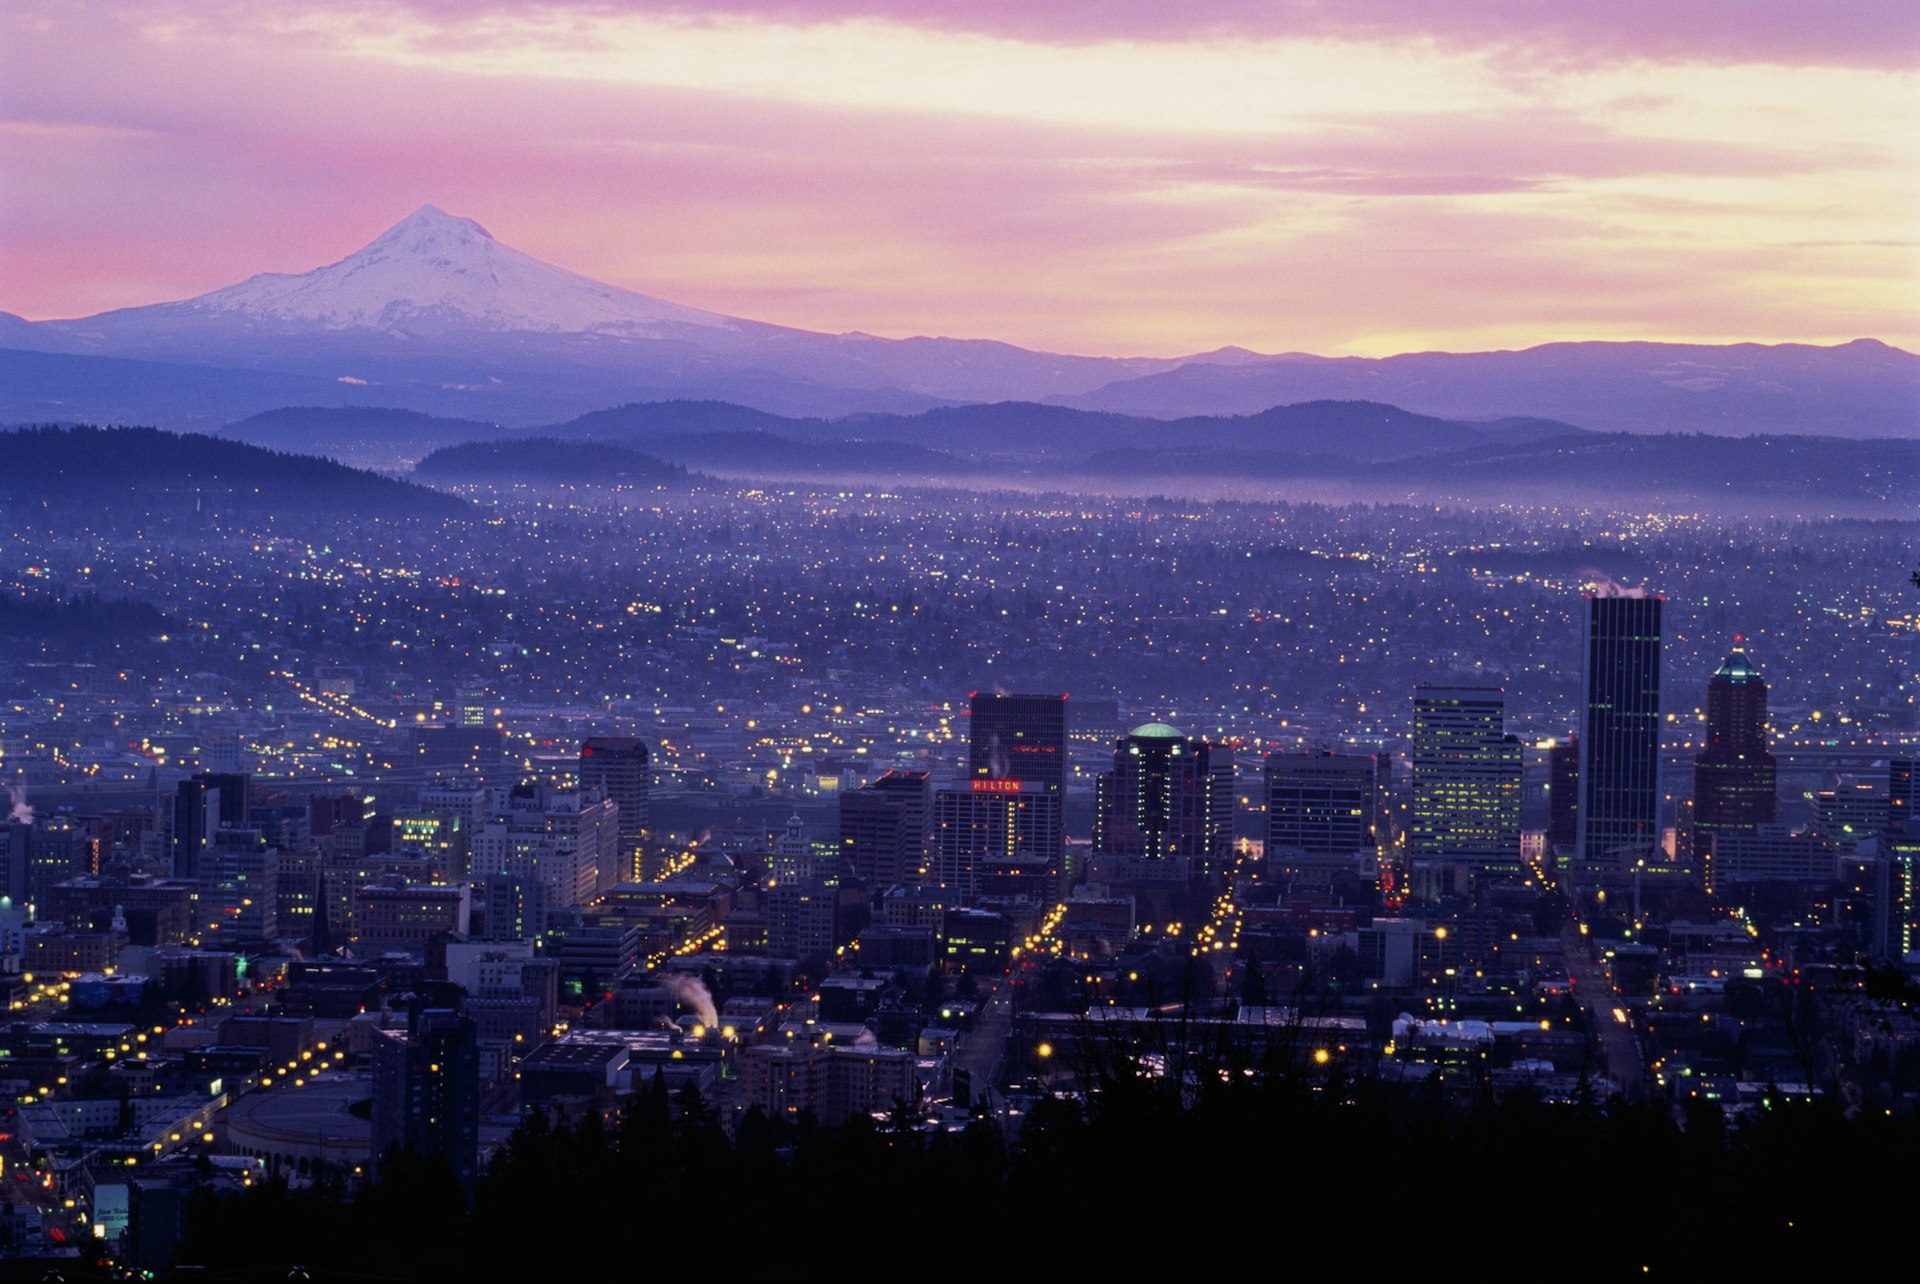 The sun rises over Portland, Oregon, washing the city's downtown skyscrapers and suburban sprawl in lavender and pink light as Mt. Hood rises over the landscape in the top left of the frame